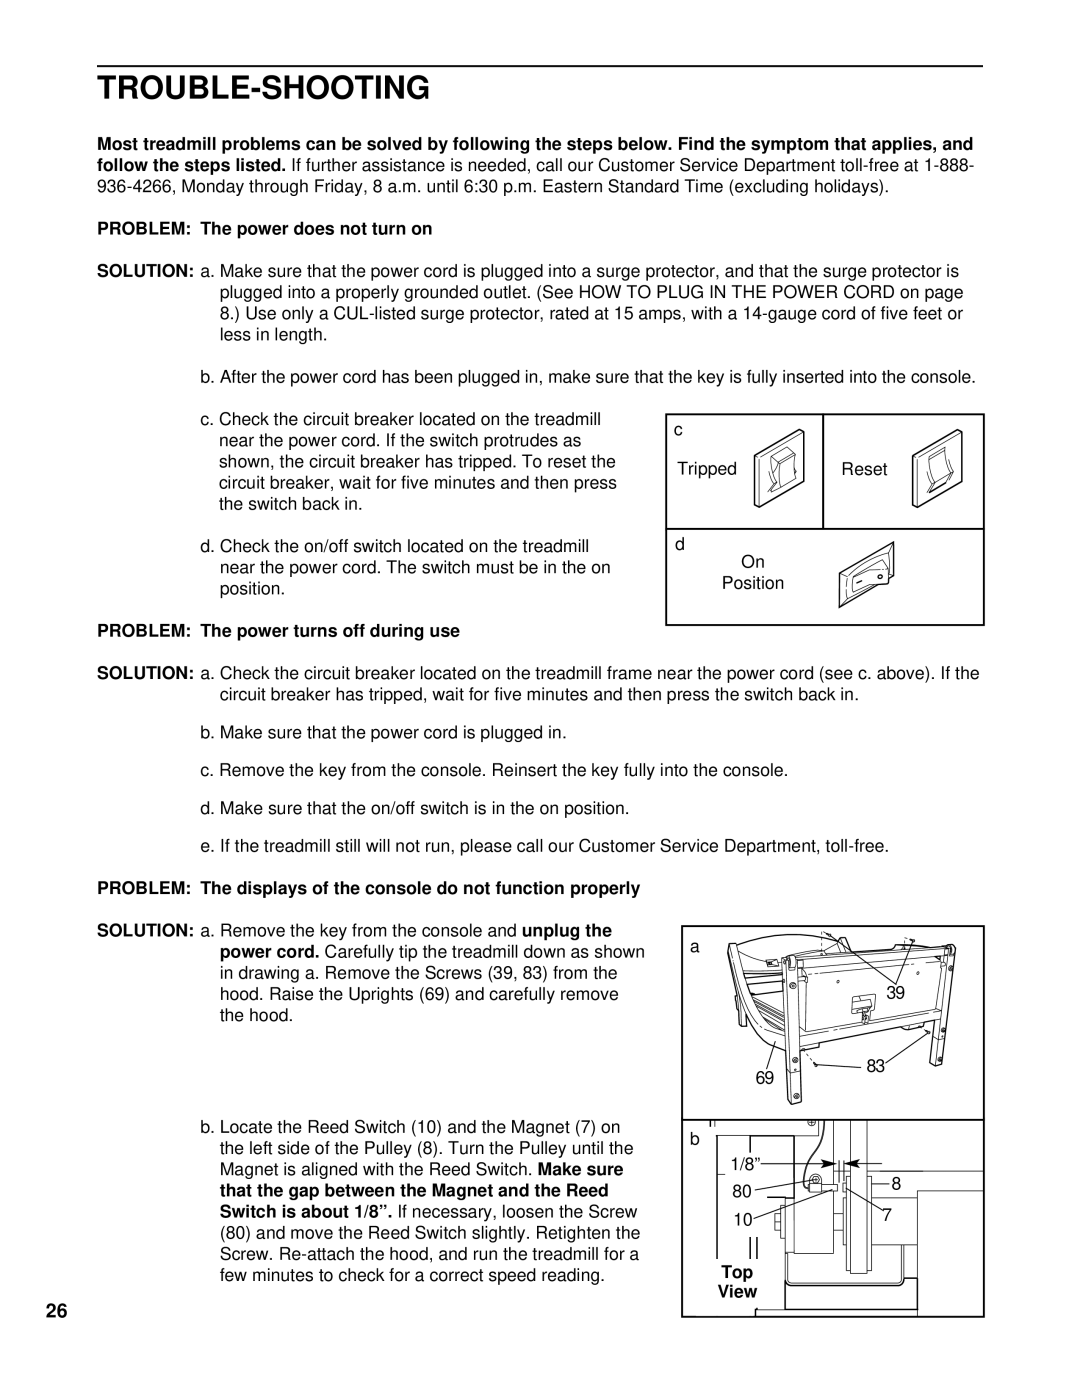 NordicTrack NCTL11991 user manual Trouble-Shooting, Solution 